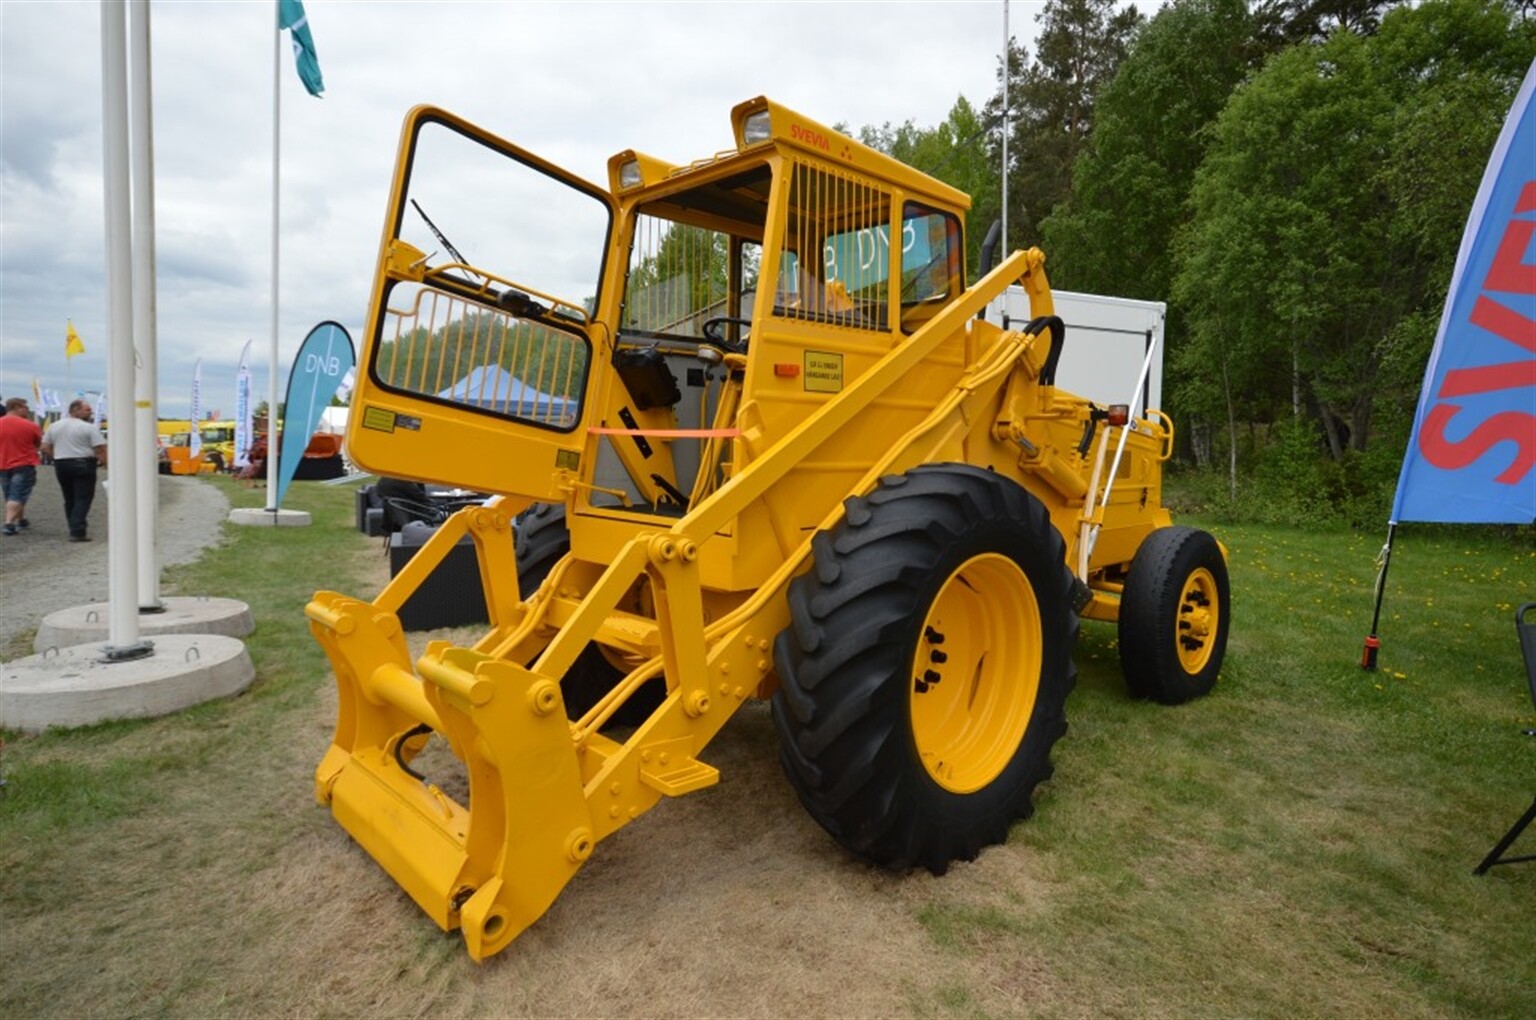 Classic restoration of an iconic Volvo loader at Maskinexpo (Blog Post Re-Visited)